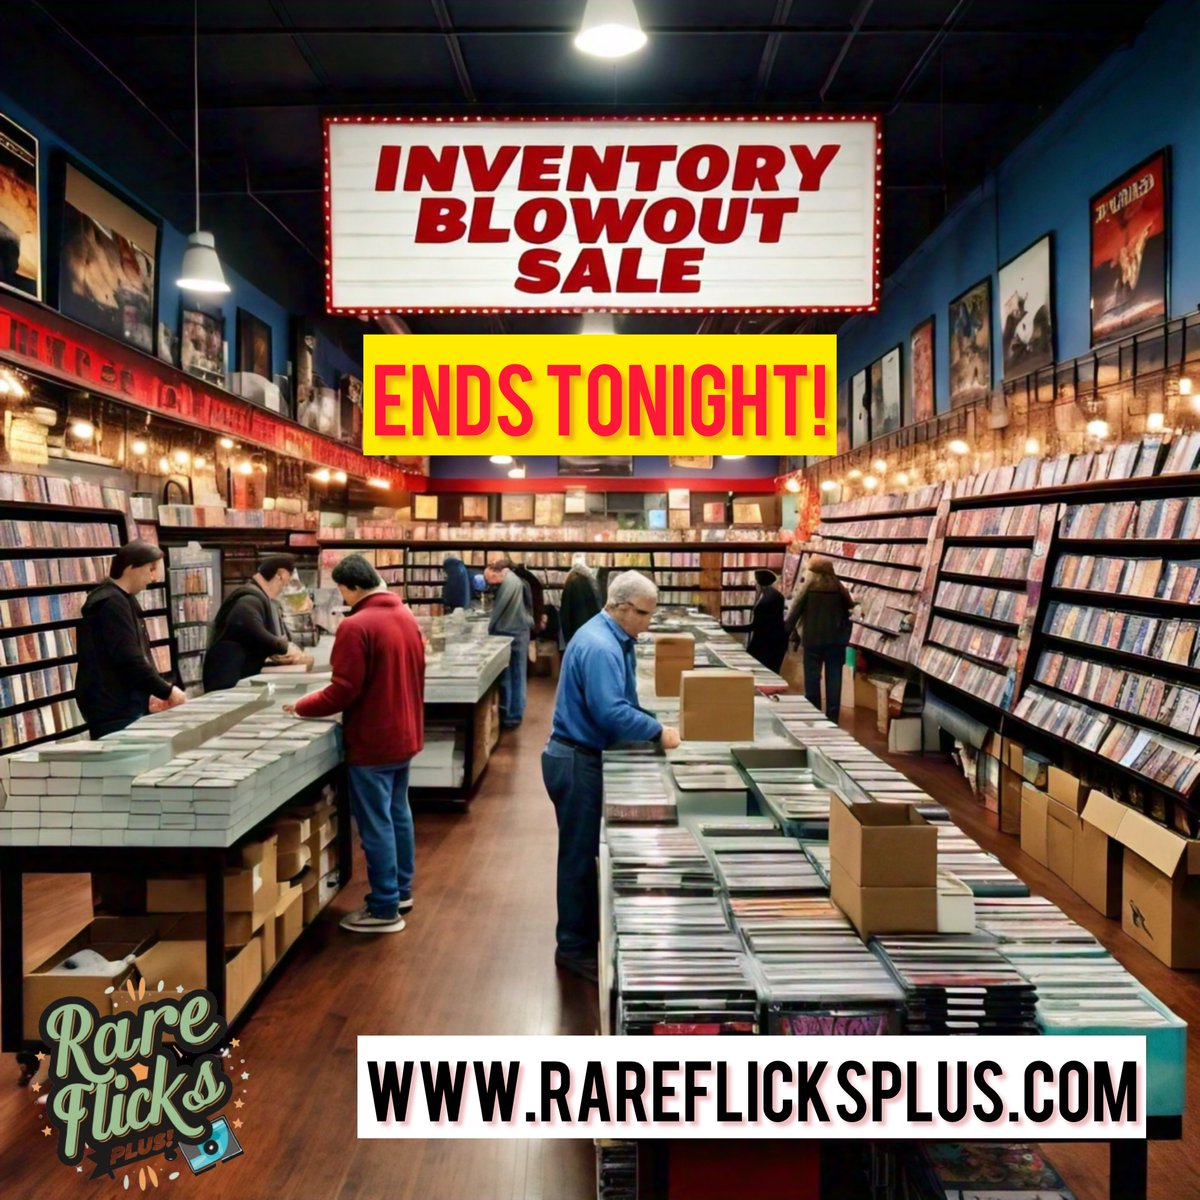 Inventory Blowout Sale!! Ends tonight, May 27th at 11:30PM EST,  50% off almost all items on our website! 

rareflicksplus.com

#DVD #DVDs #PhysicalMedia #VHS #VHSTapes #VideoStore #htf #rare #Bluray #Blurays #BluRayStore #blowout #sale #50percentoff  #discountdvds #retro